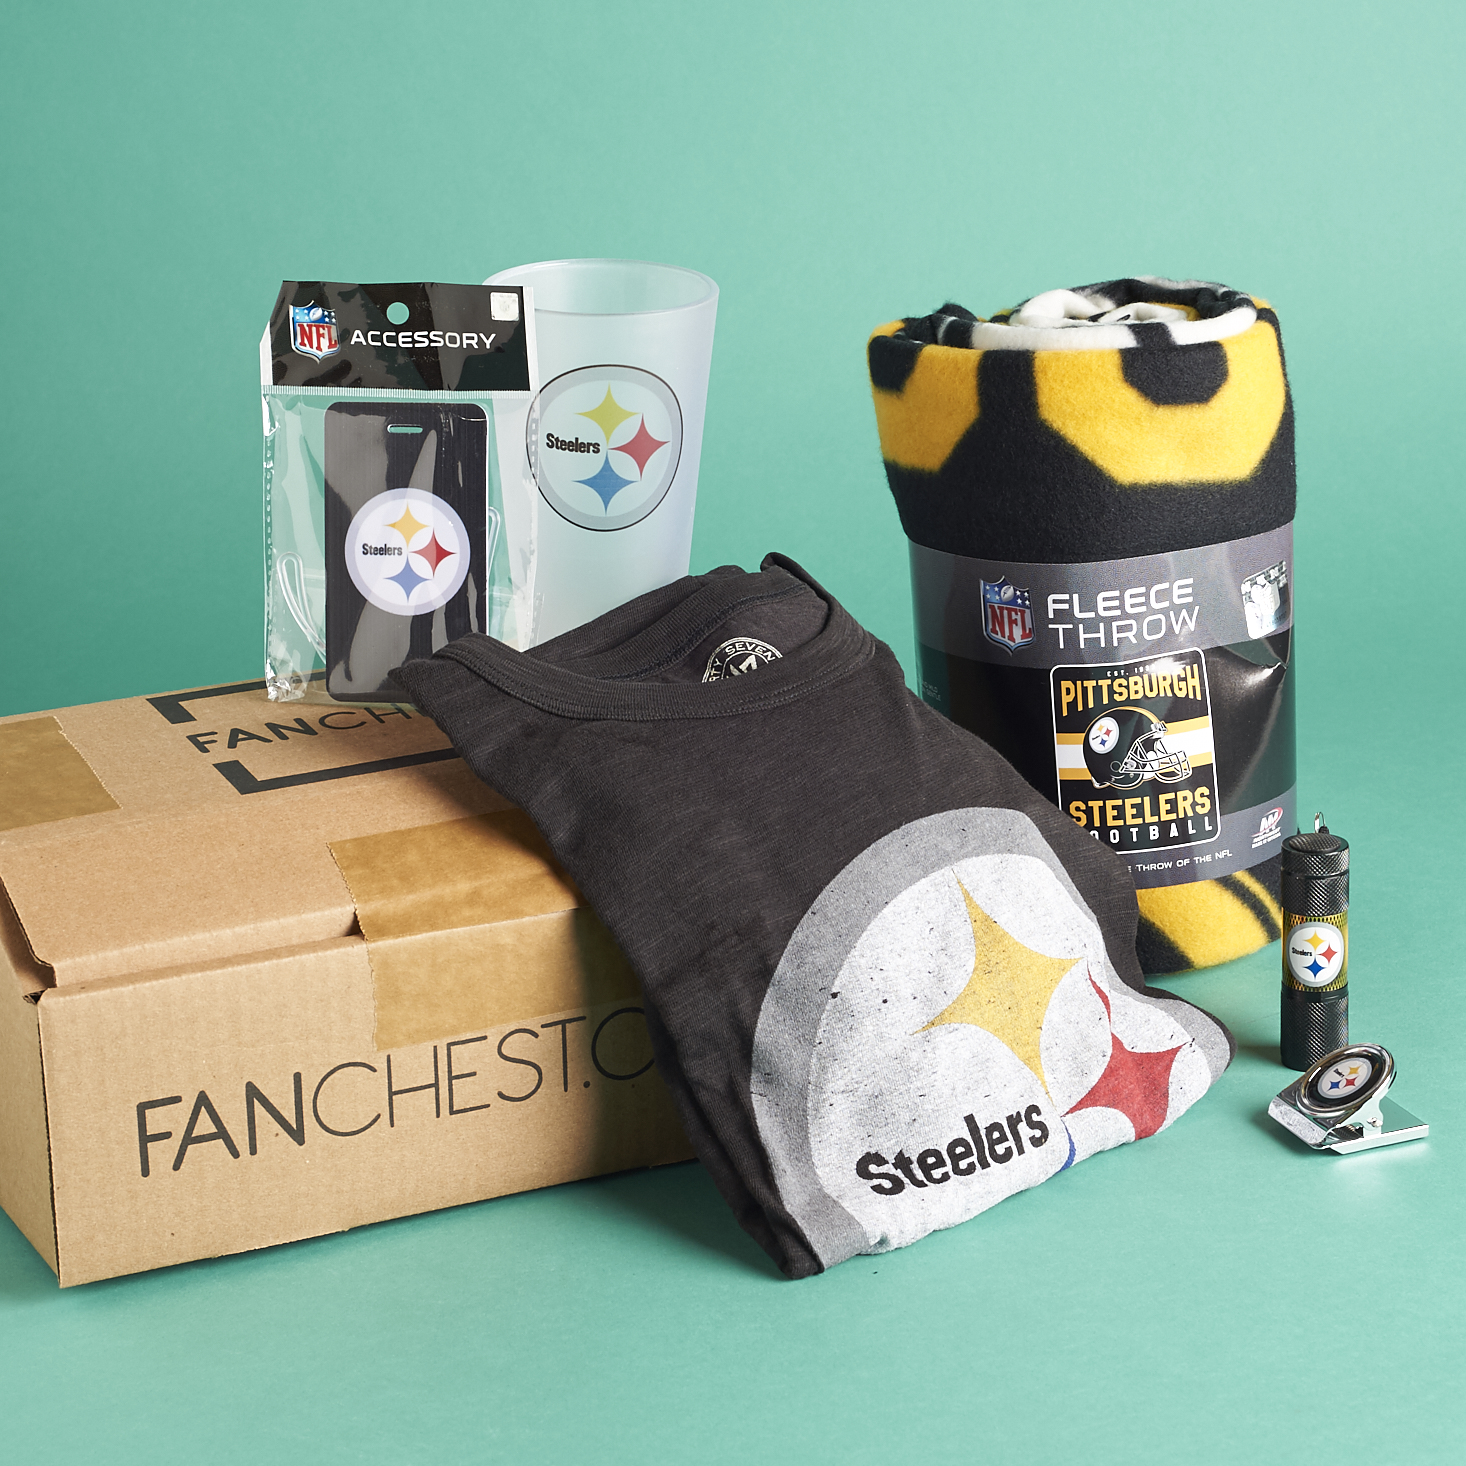 Pittsburgh Steelers Fanchest Box Review – April 2017